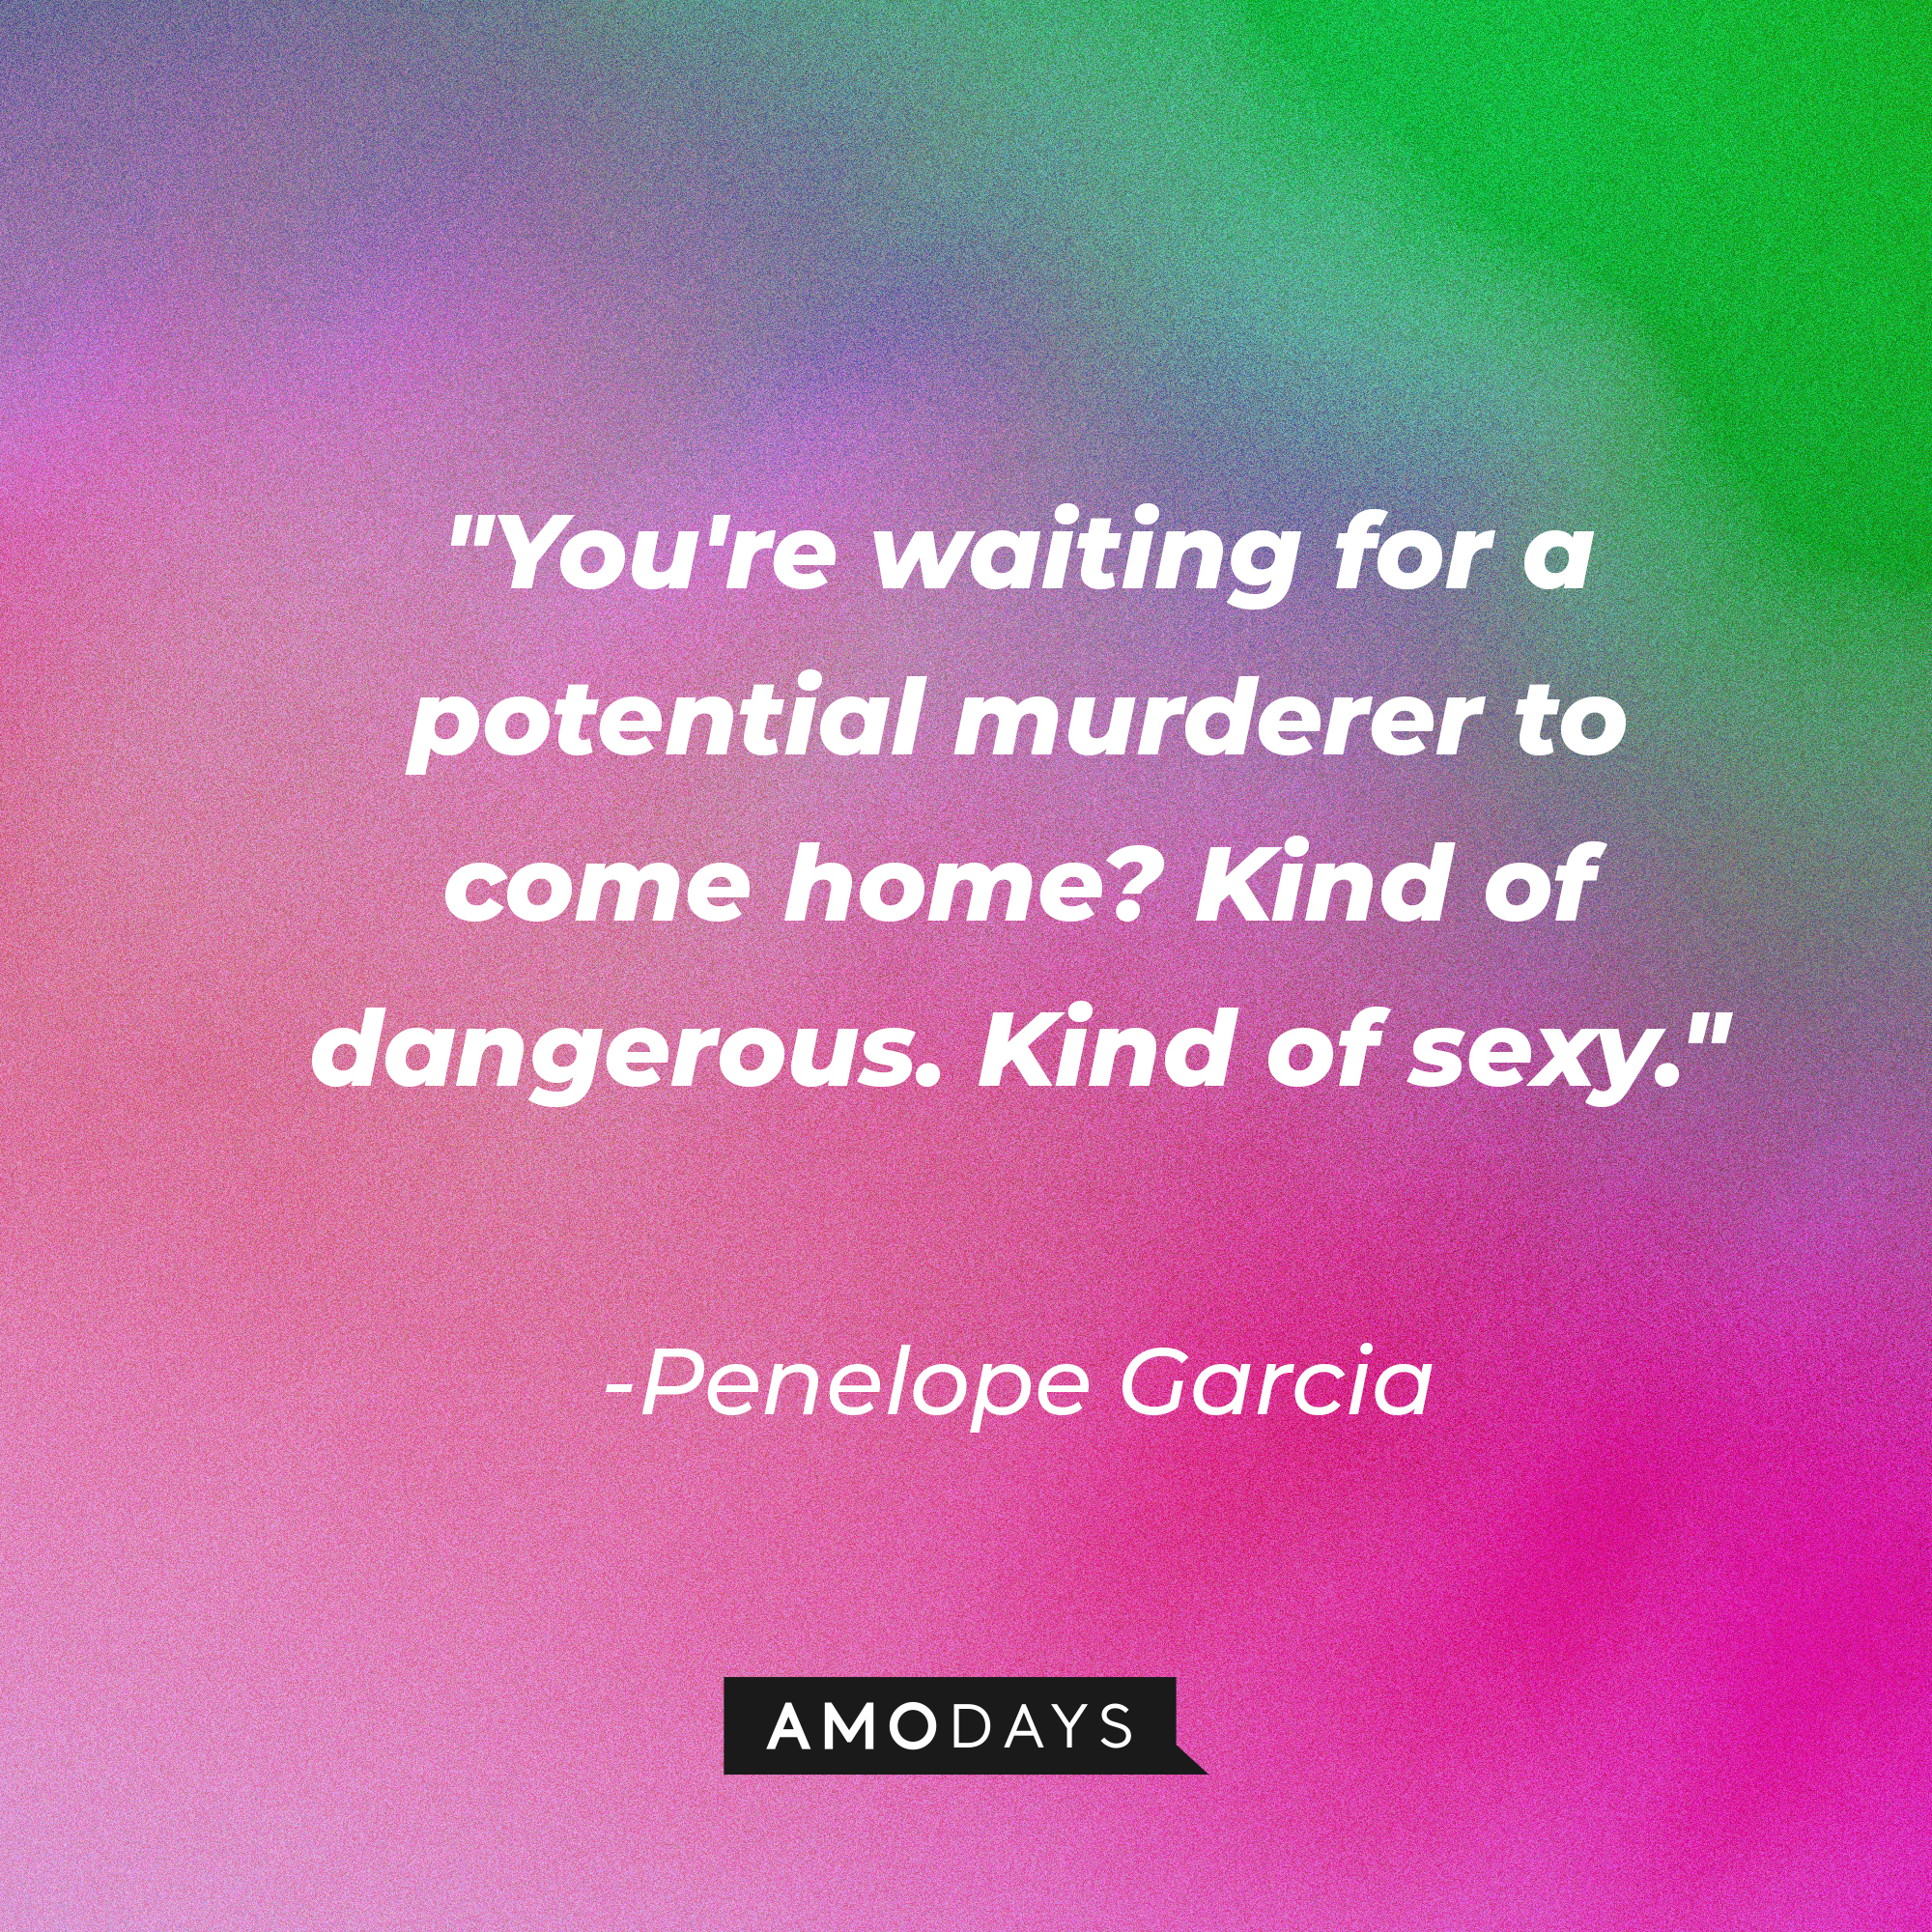 Penelope Garcia's quote: "You're waiting for a potential murderer to come home? Kind of dangerous. Kind of sexy." | Source: AmoDays